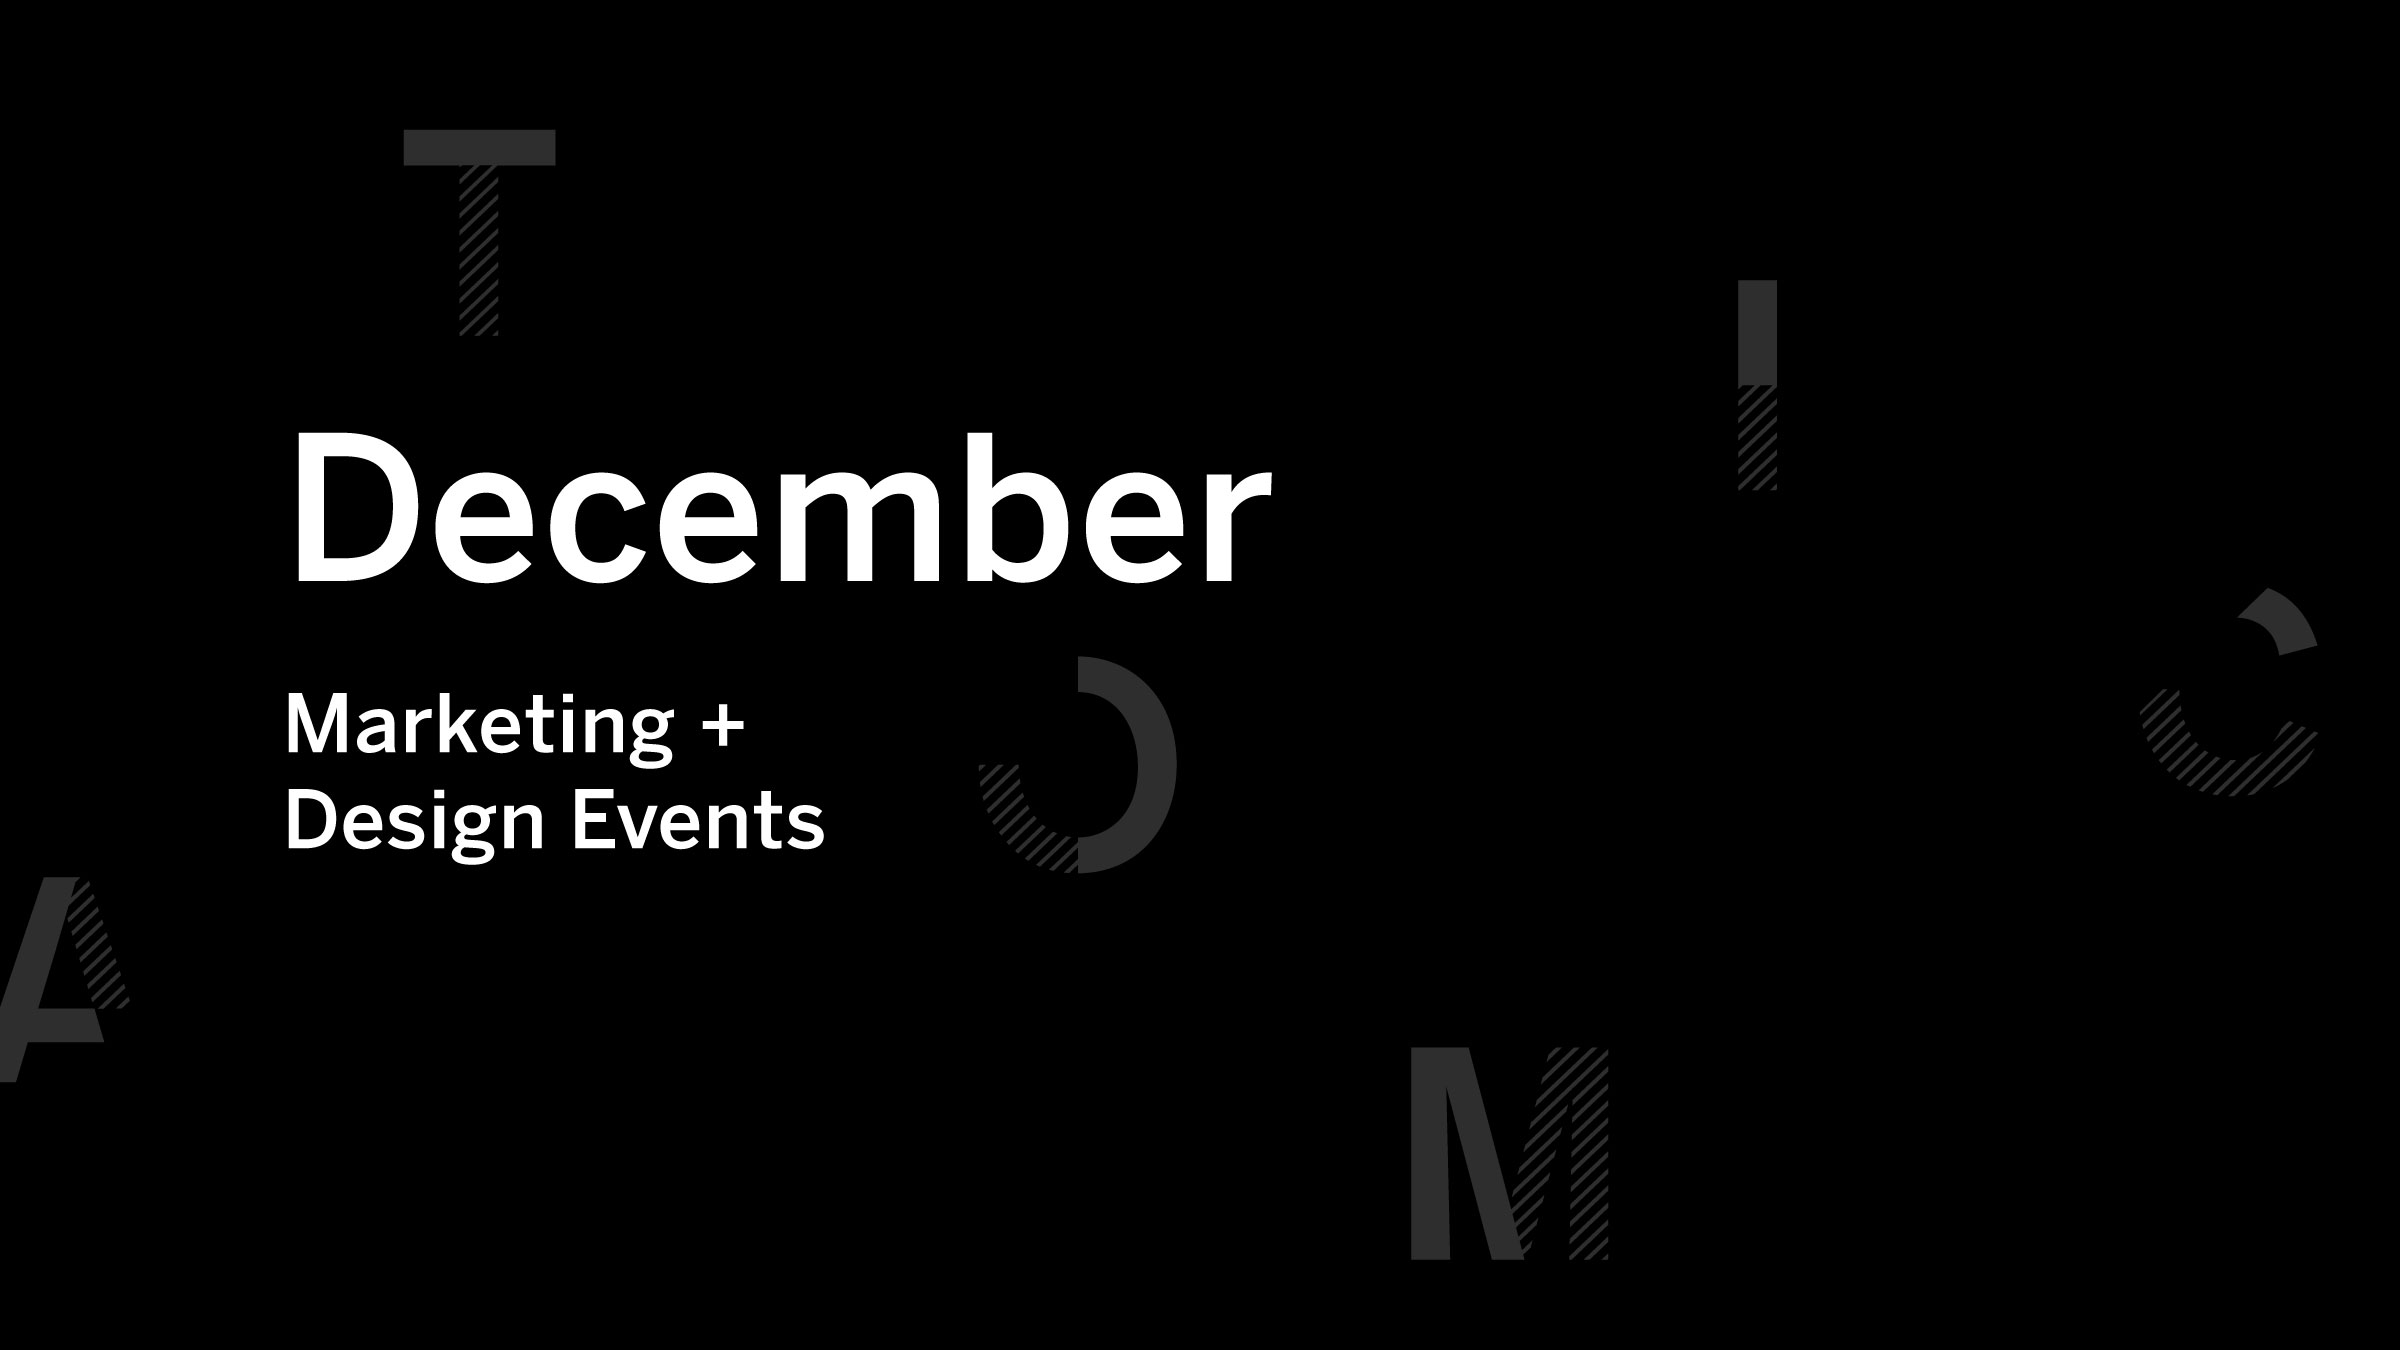 December 2019 Marketing and Design events in St. Louis